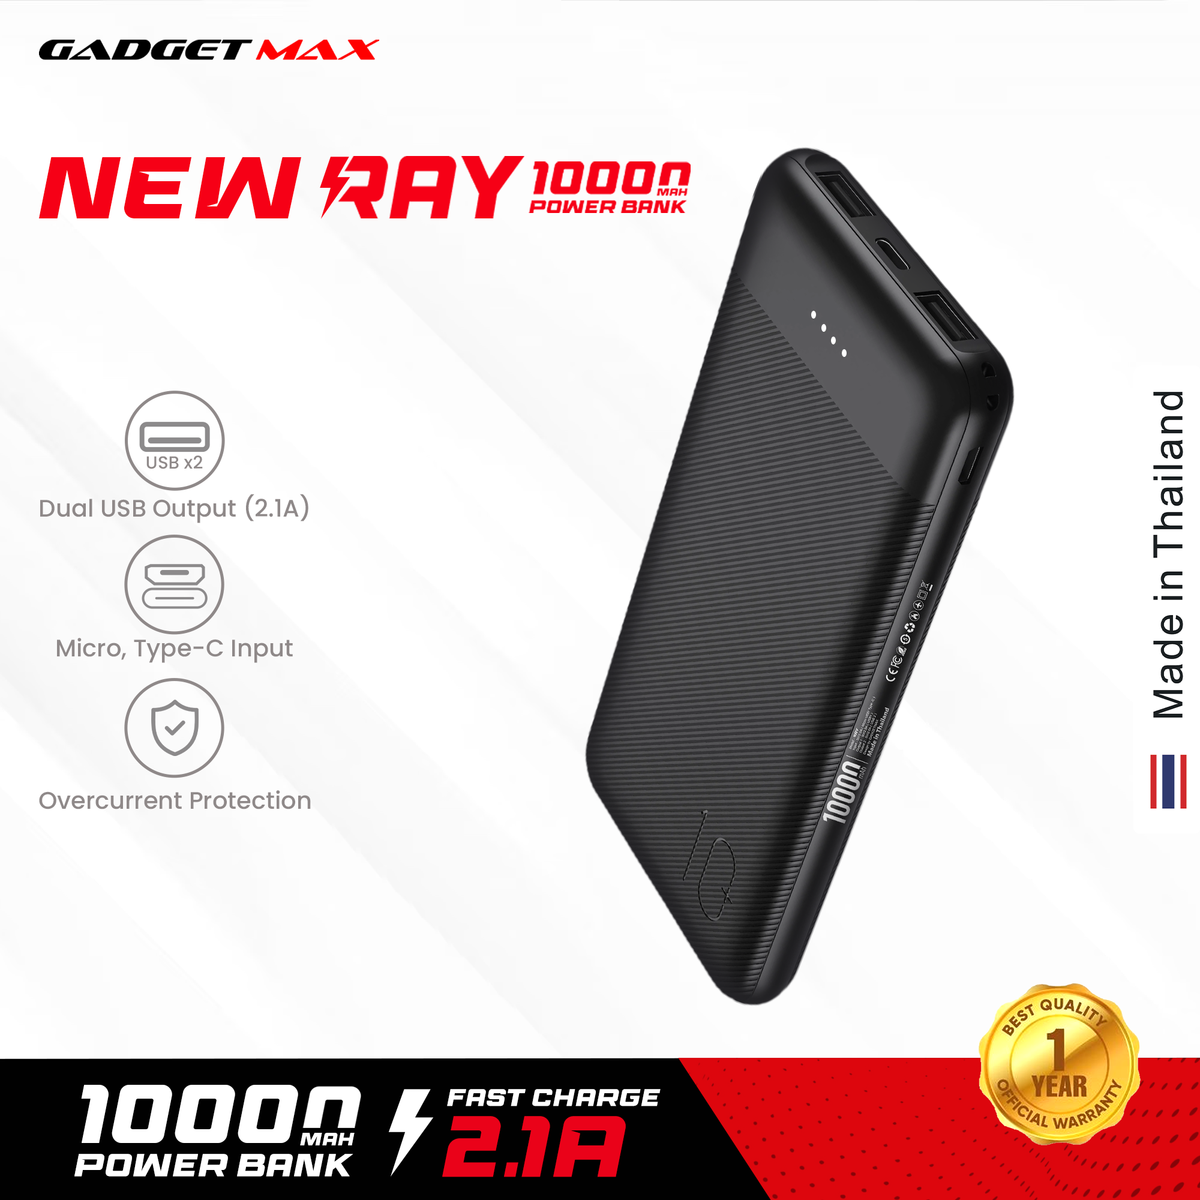 GADGET MAX 10000mAh NEW RAY POWER BANK 10000mAh(5V/2.1A)(OUTPUT-2USB/INPUT-MICRO,TYPE-C), 10000 mAh Power bank, All-in-one Power Bank-Black